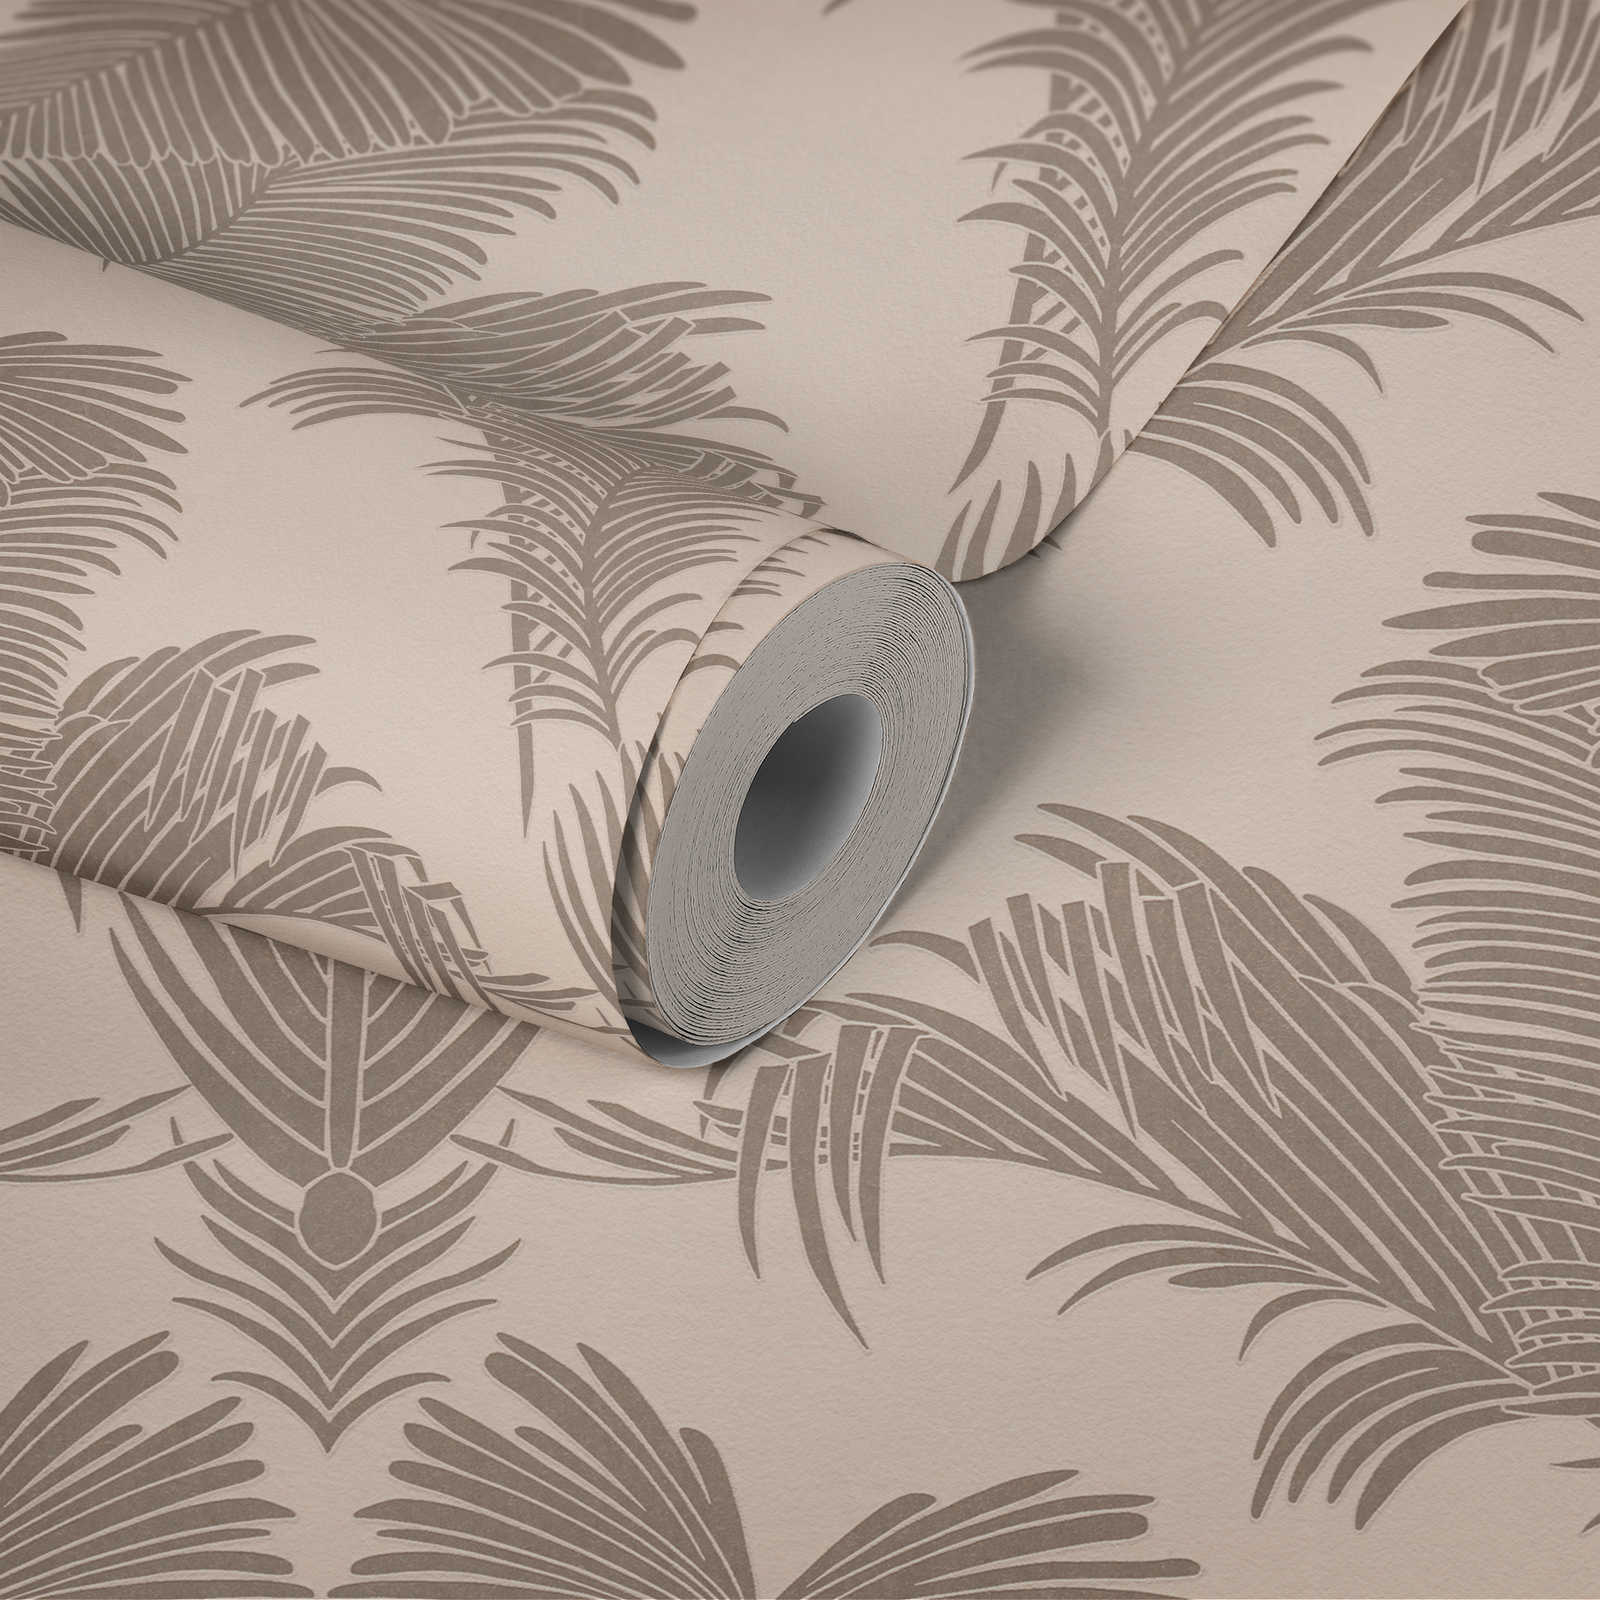             Palm leaves wallpaper pink with metallic & matte effect
        